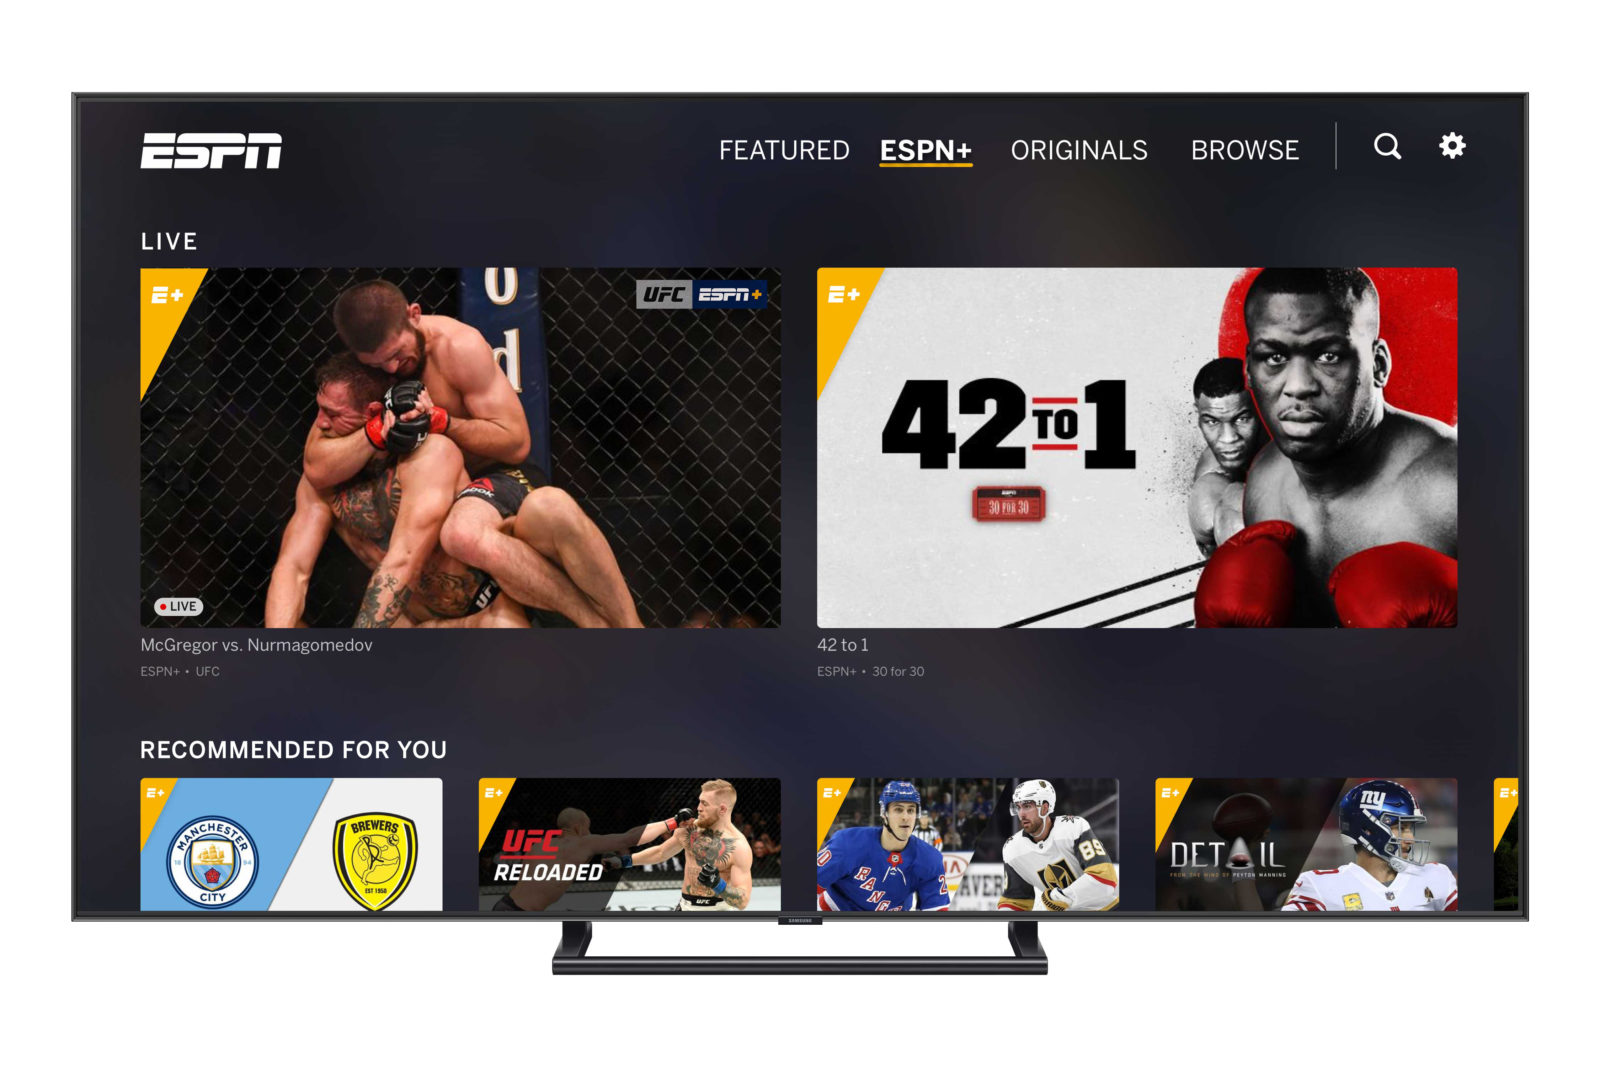 How to watch ESPN Plus on your TV